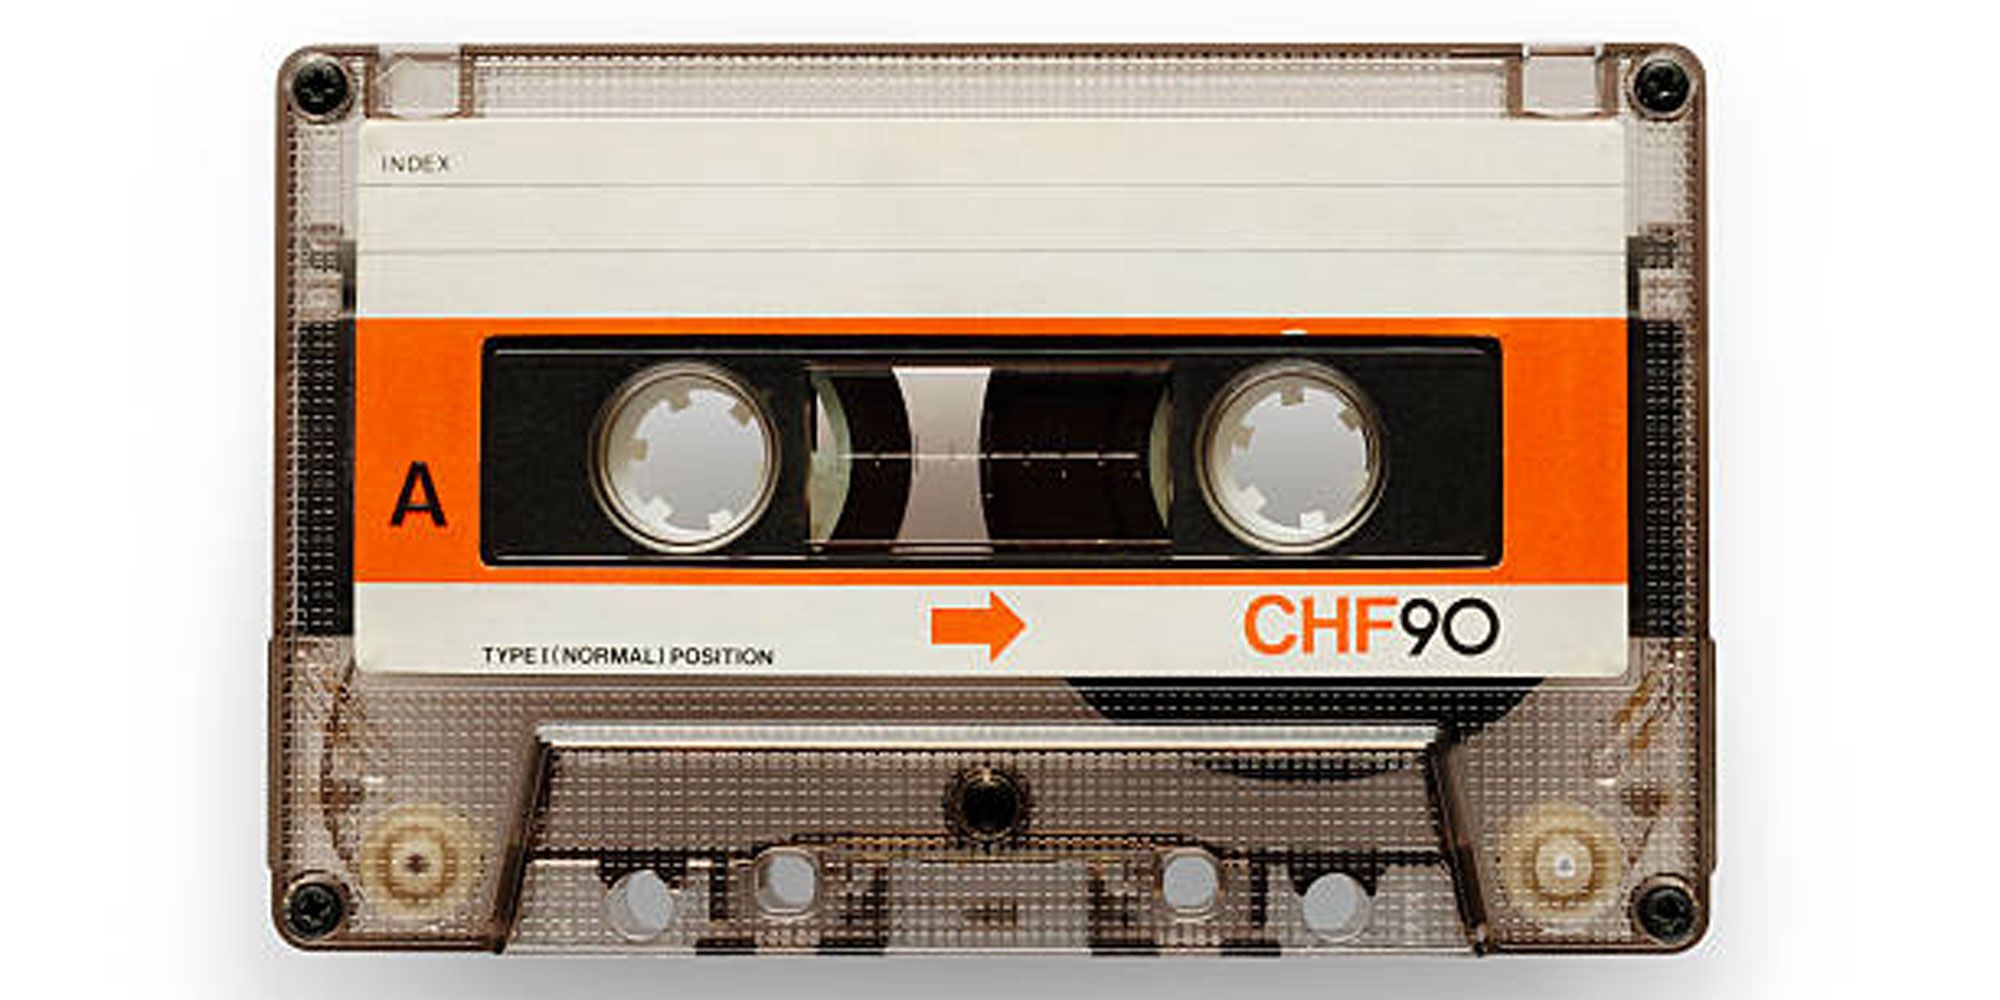 A product image of a Cassette-Tapes